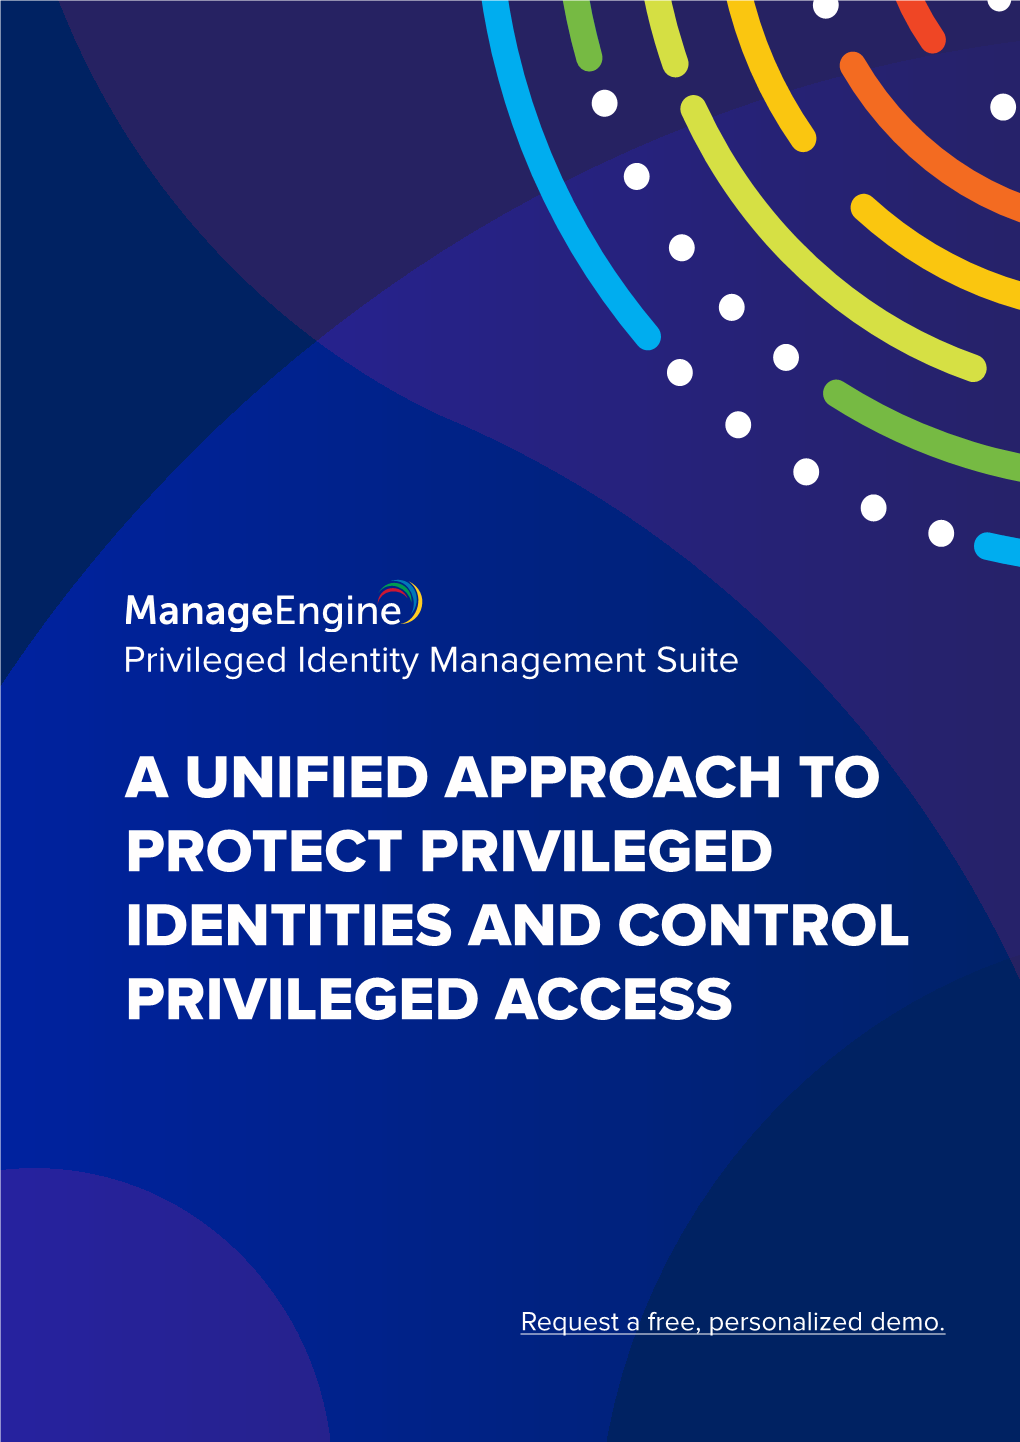 A Unified Approach to Protect Privileged Identities and Control Privileged Access